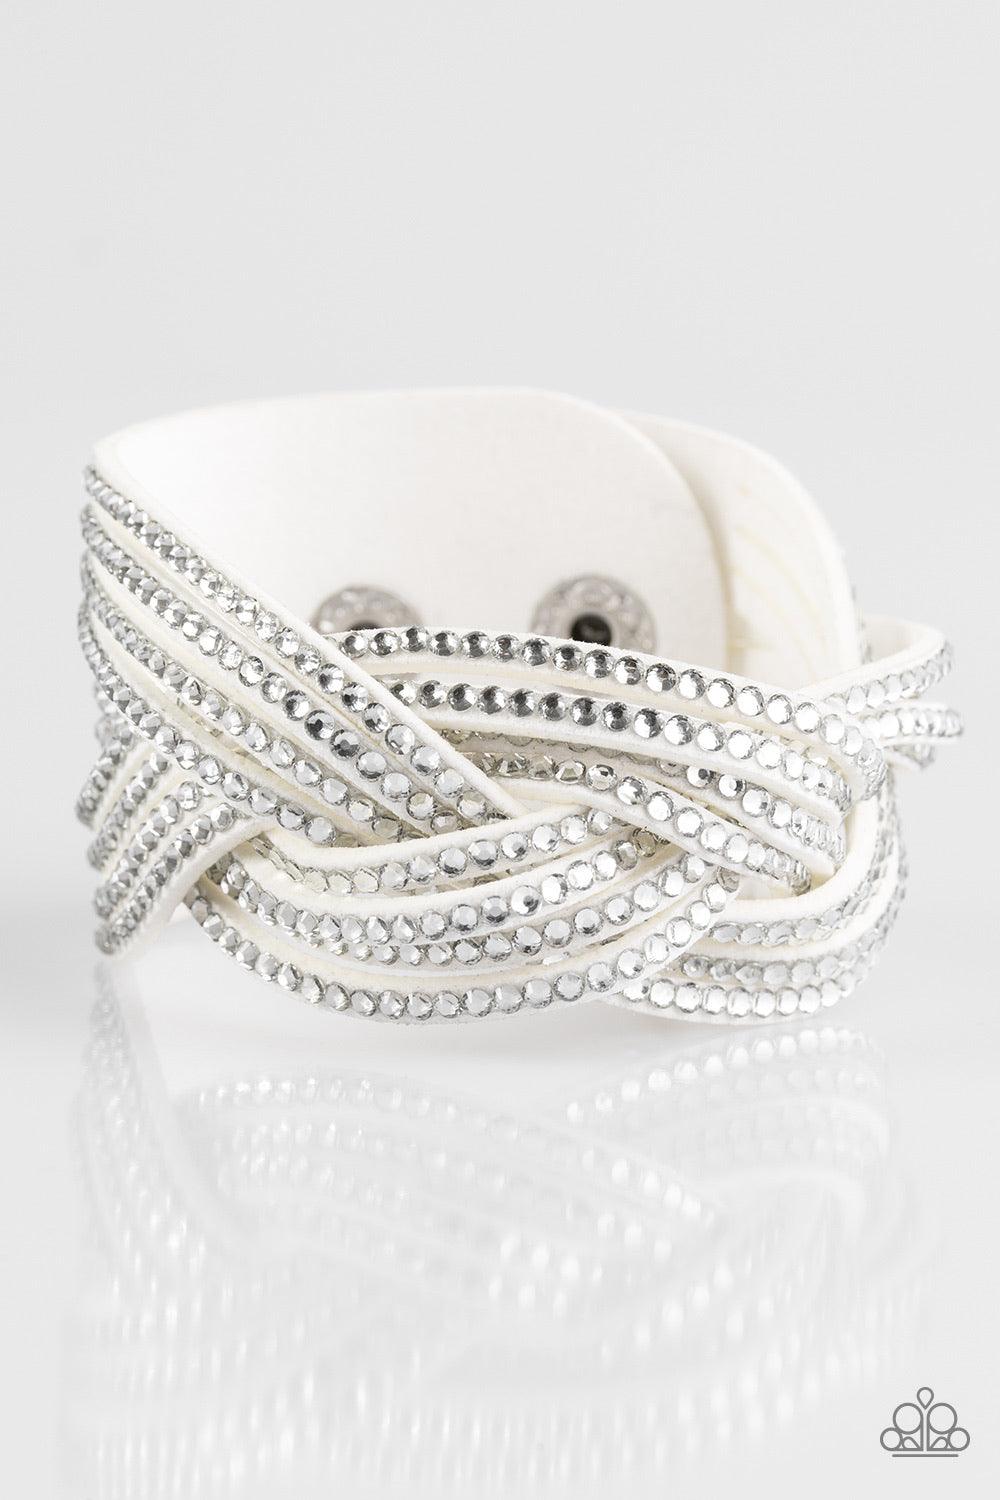 Paparazzi Accessories Big City Shimmer - White Glassy white rhinestones are encrusted along crisscrossing strands of white suede, creating bold shimmer around the wrist. Features an adjustable snap closure. Sold as one individual bracelet. Jewelry